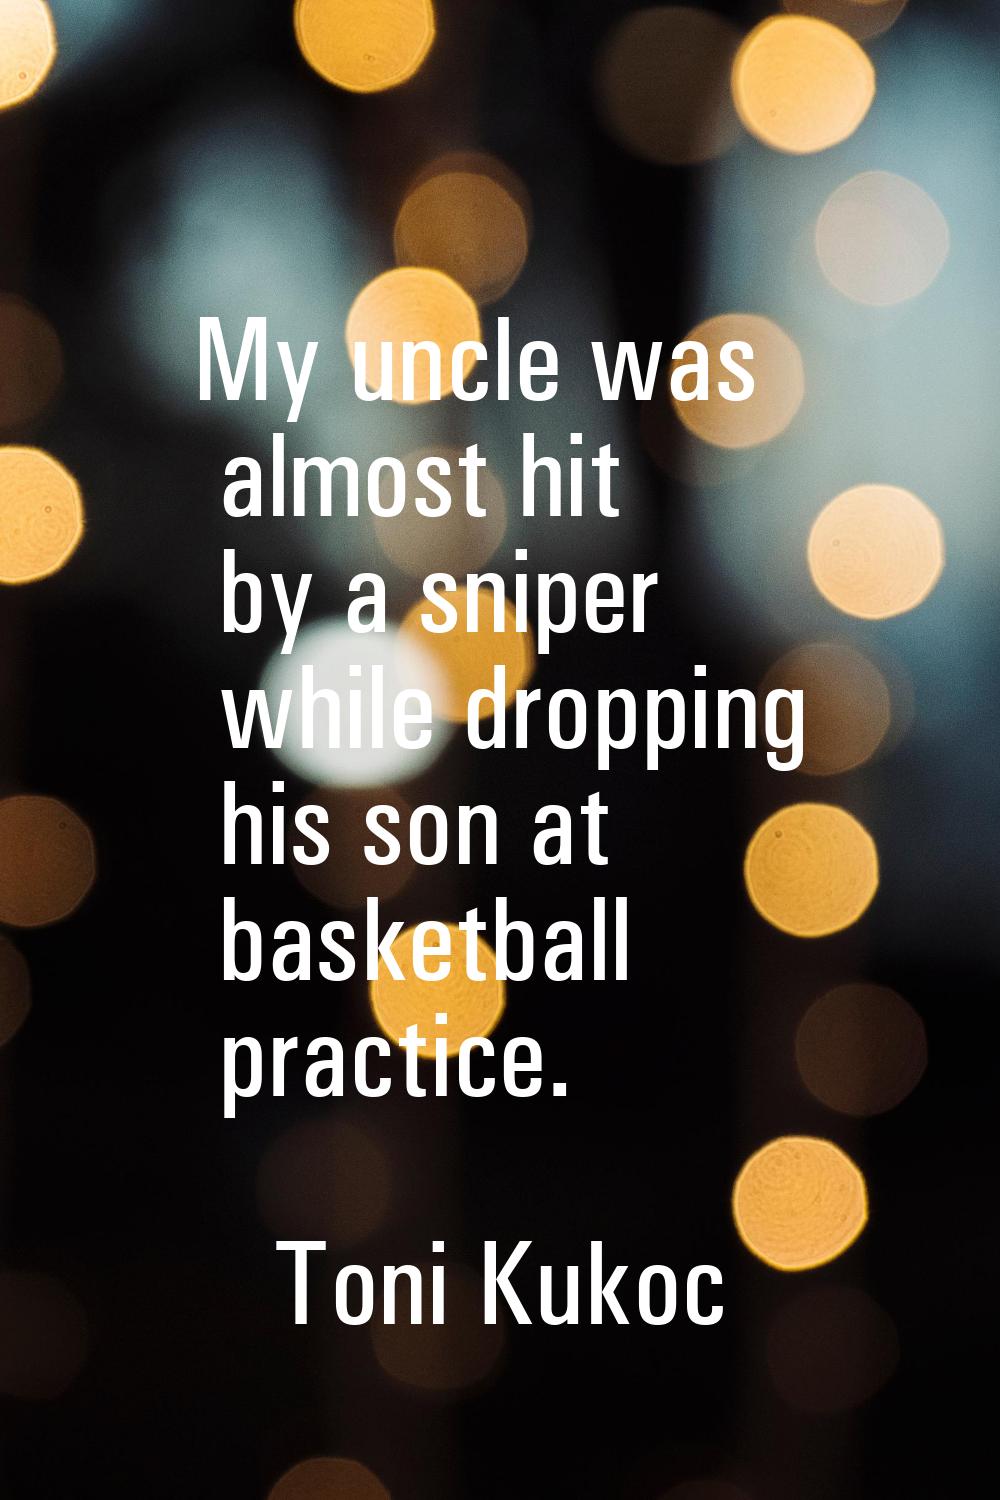 My uncle was almost hit by a sniper while dropping his son at basketball practice.